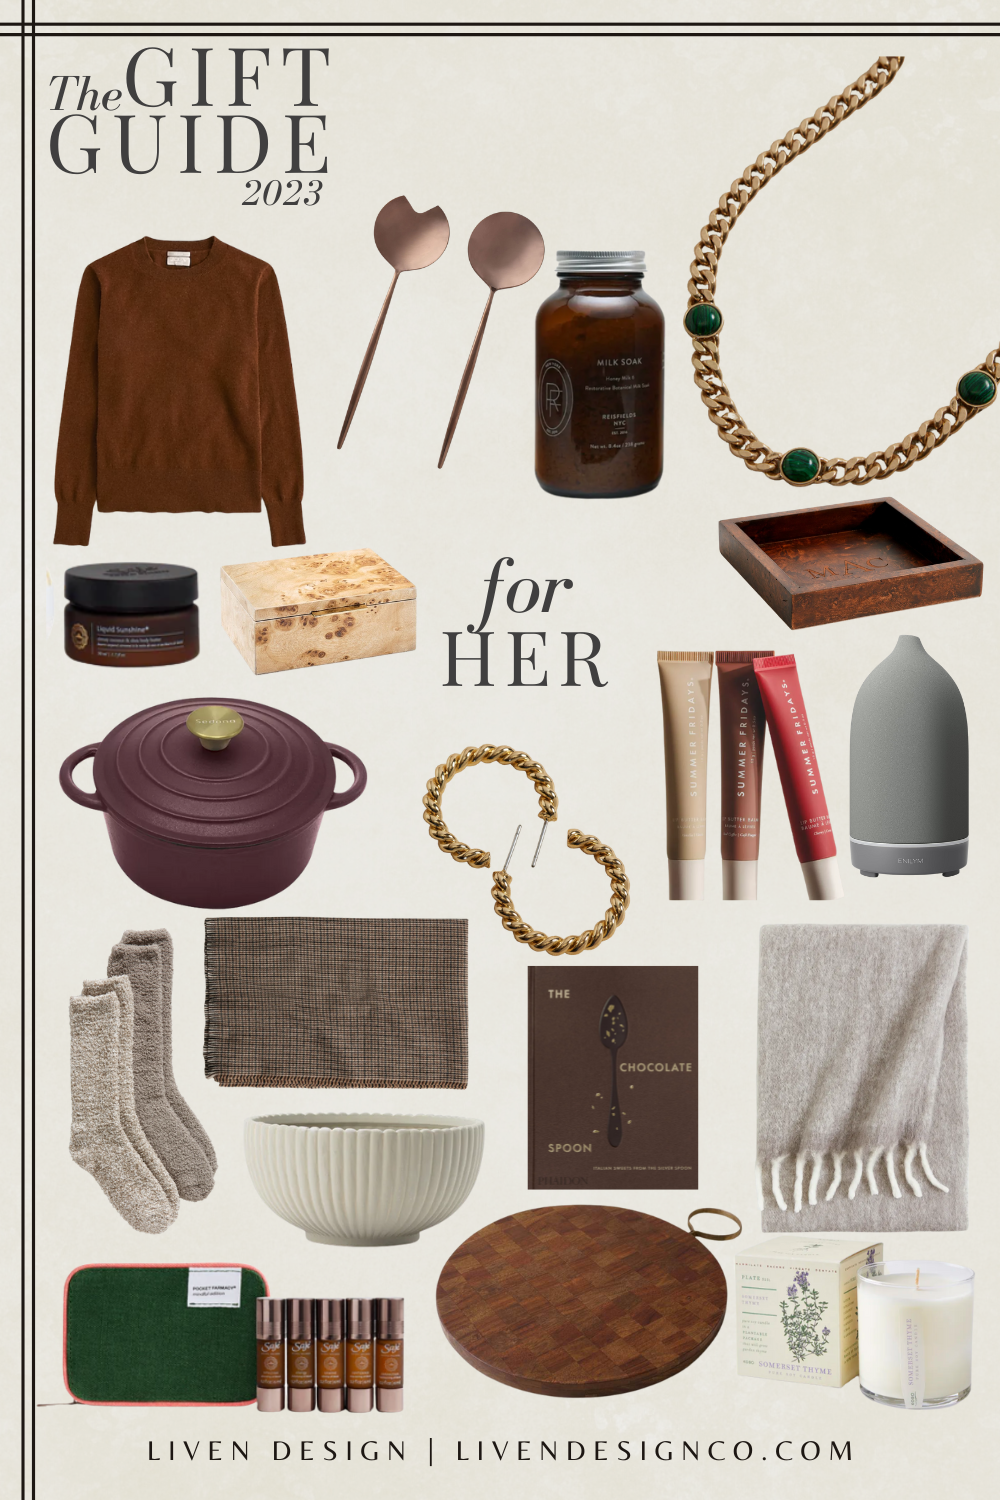 The Gift Guide 2023  Gifts for Her — LIVEN DESIGN